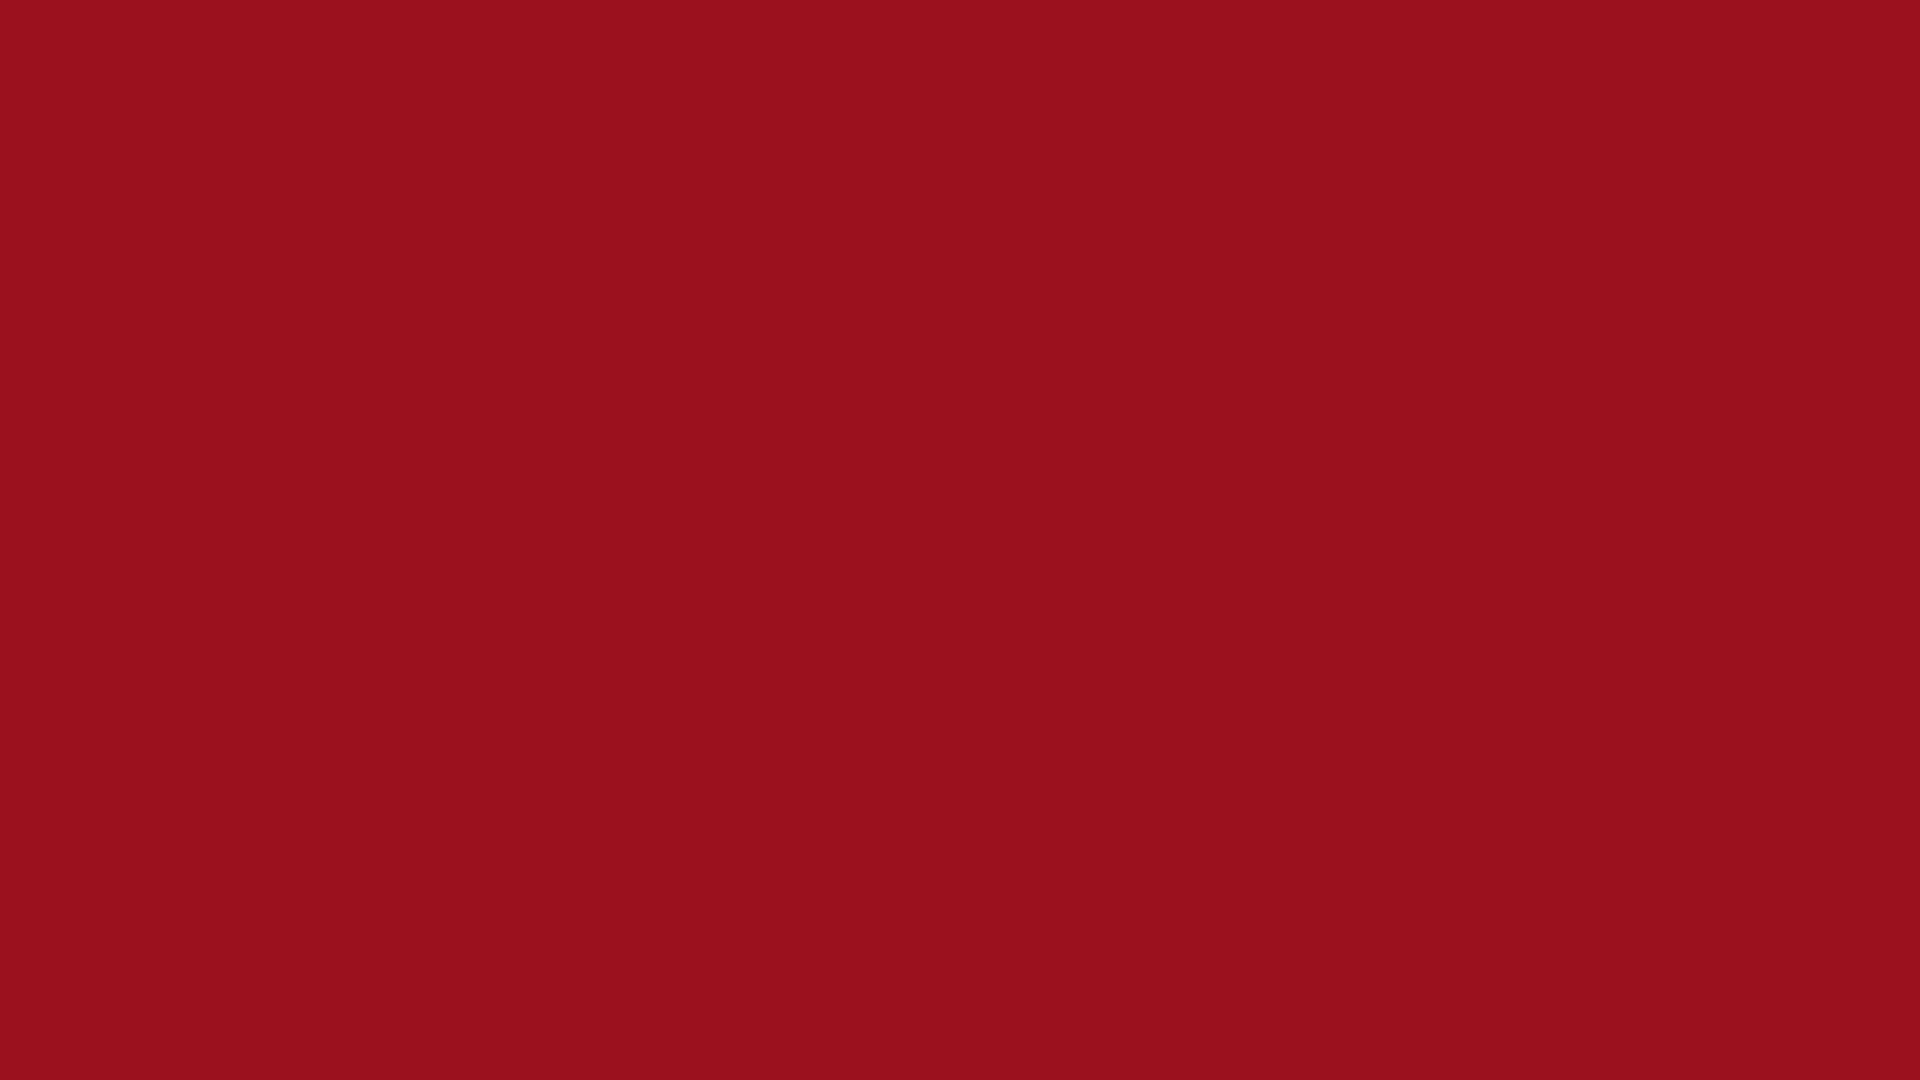 1920x1080 Ruby Red Solid Color Background